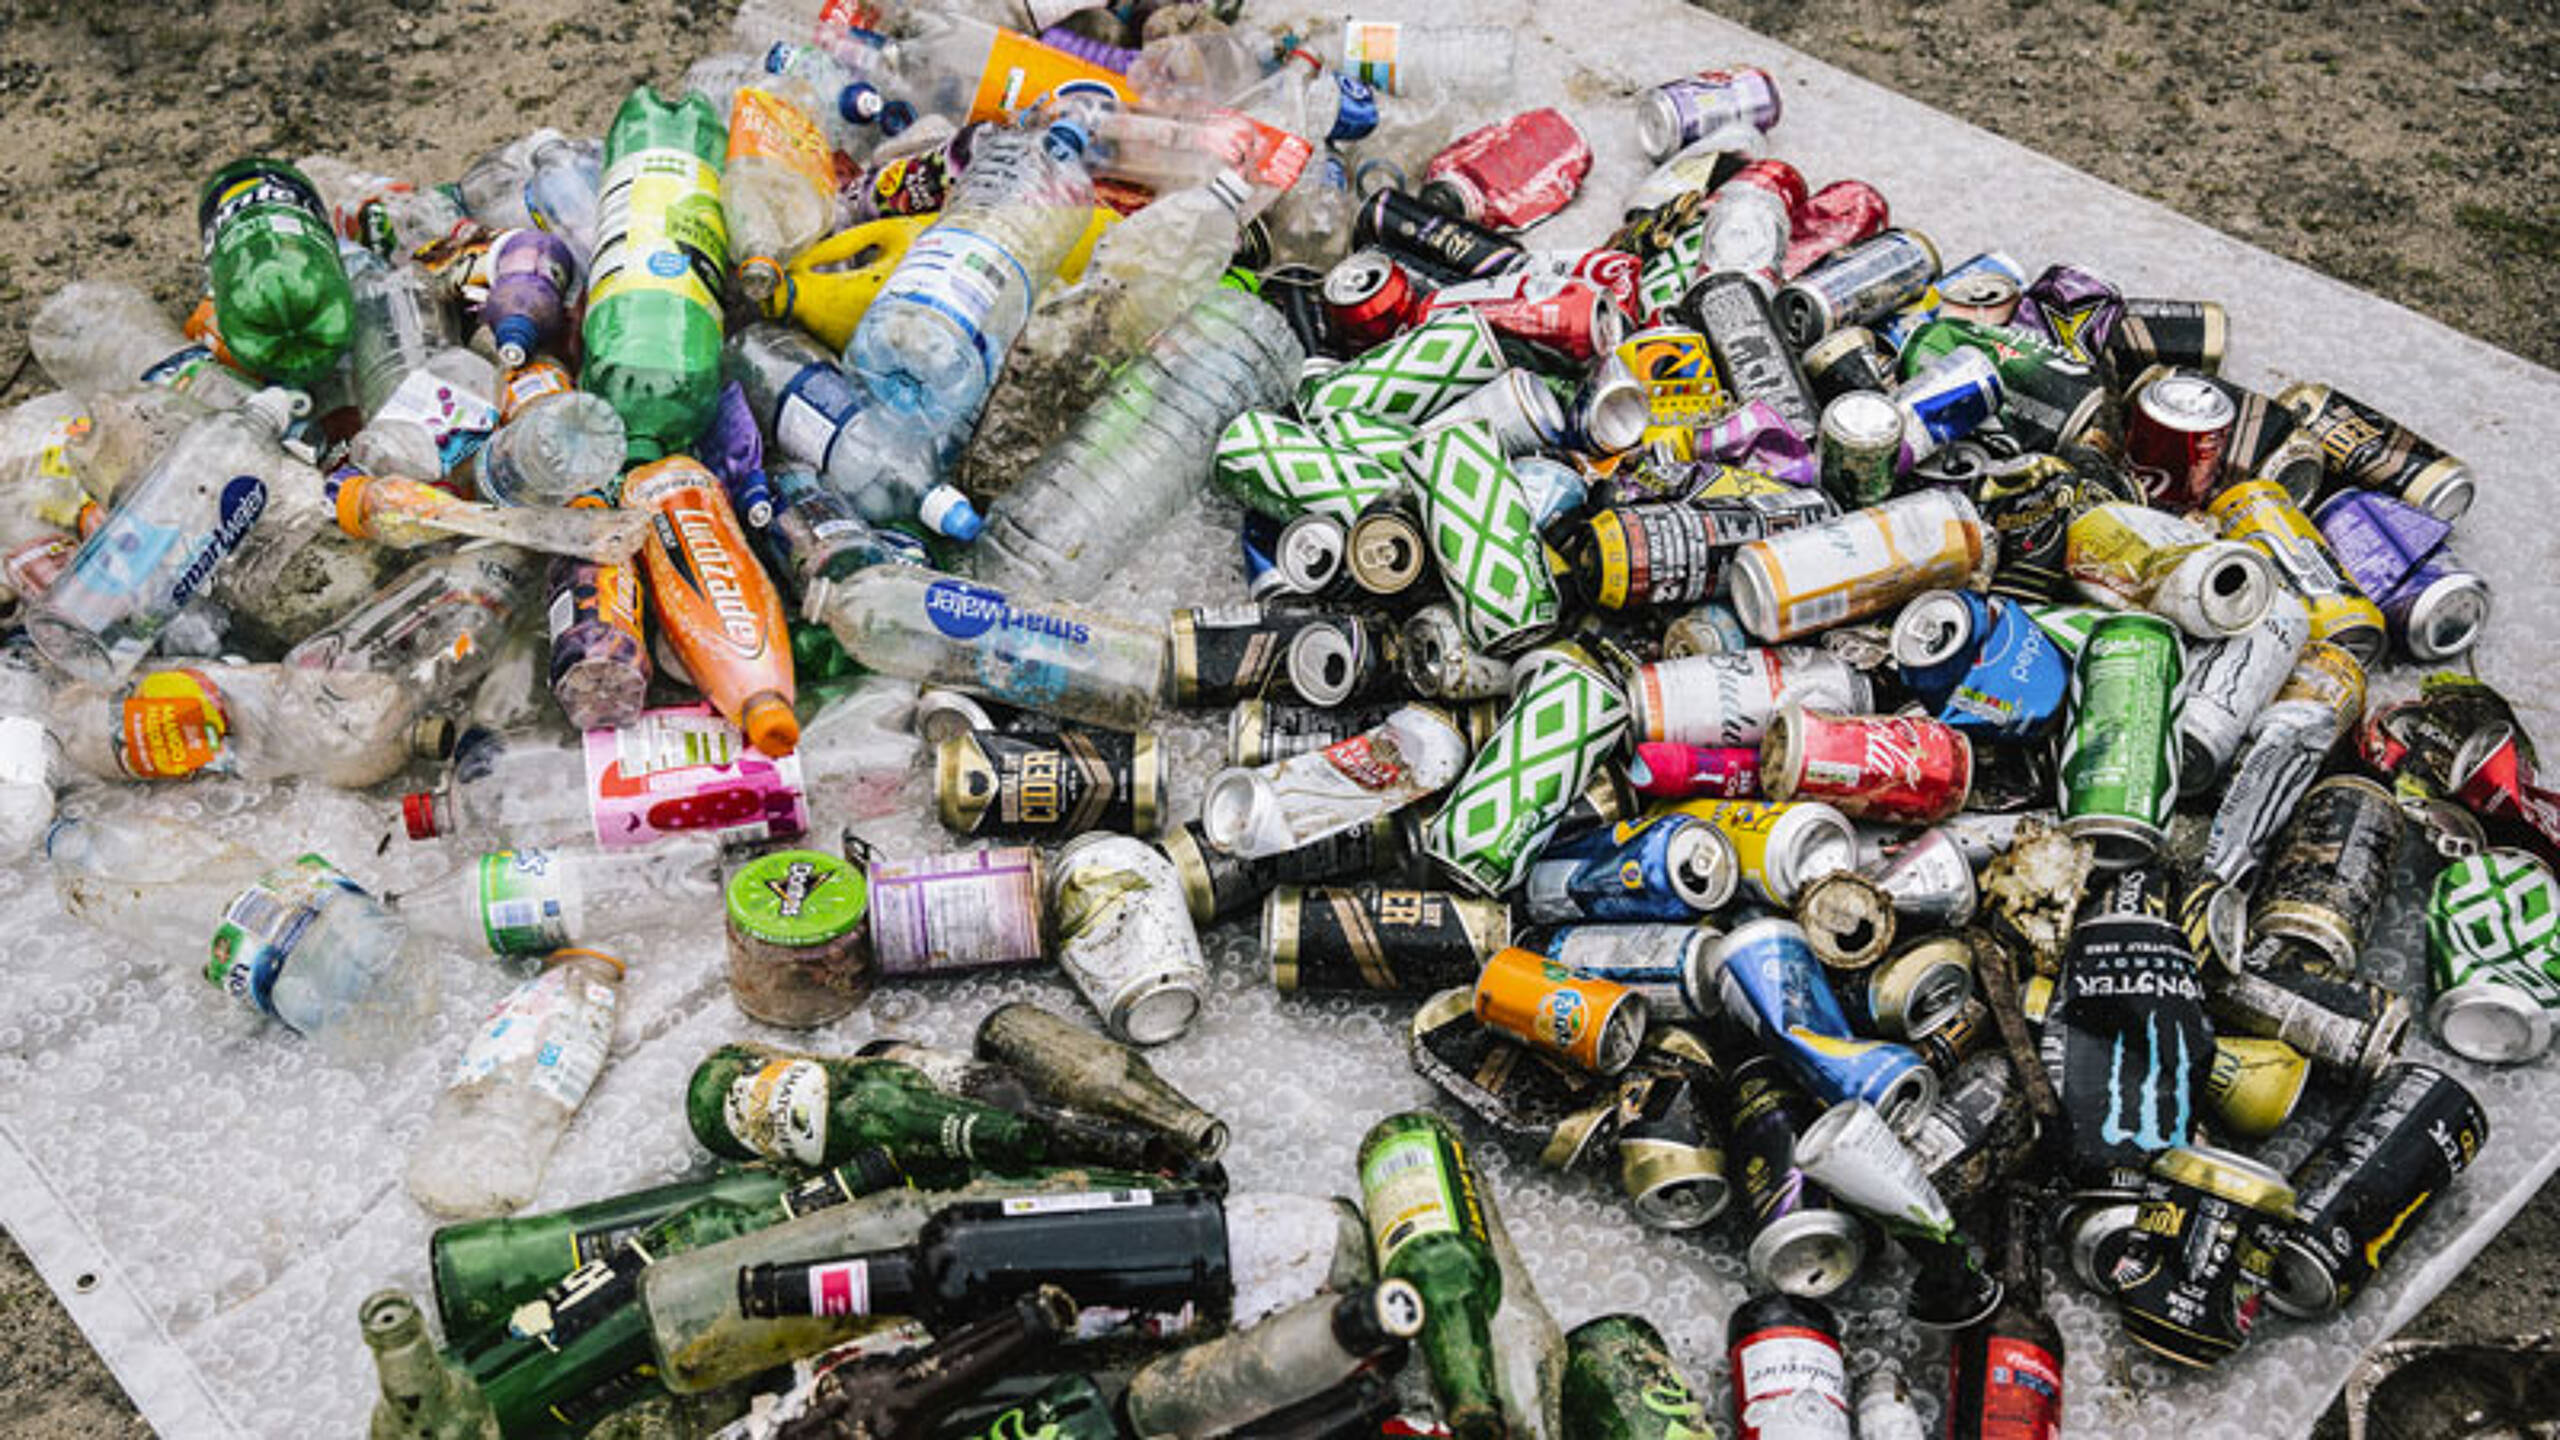 Dirty Dozen: The 12 businesses responsible for 70% of litter in the UK